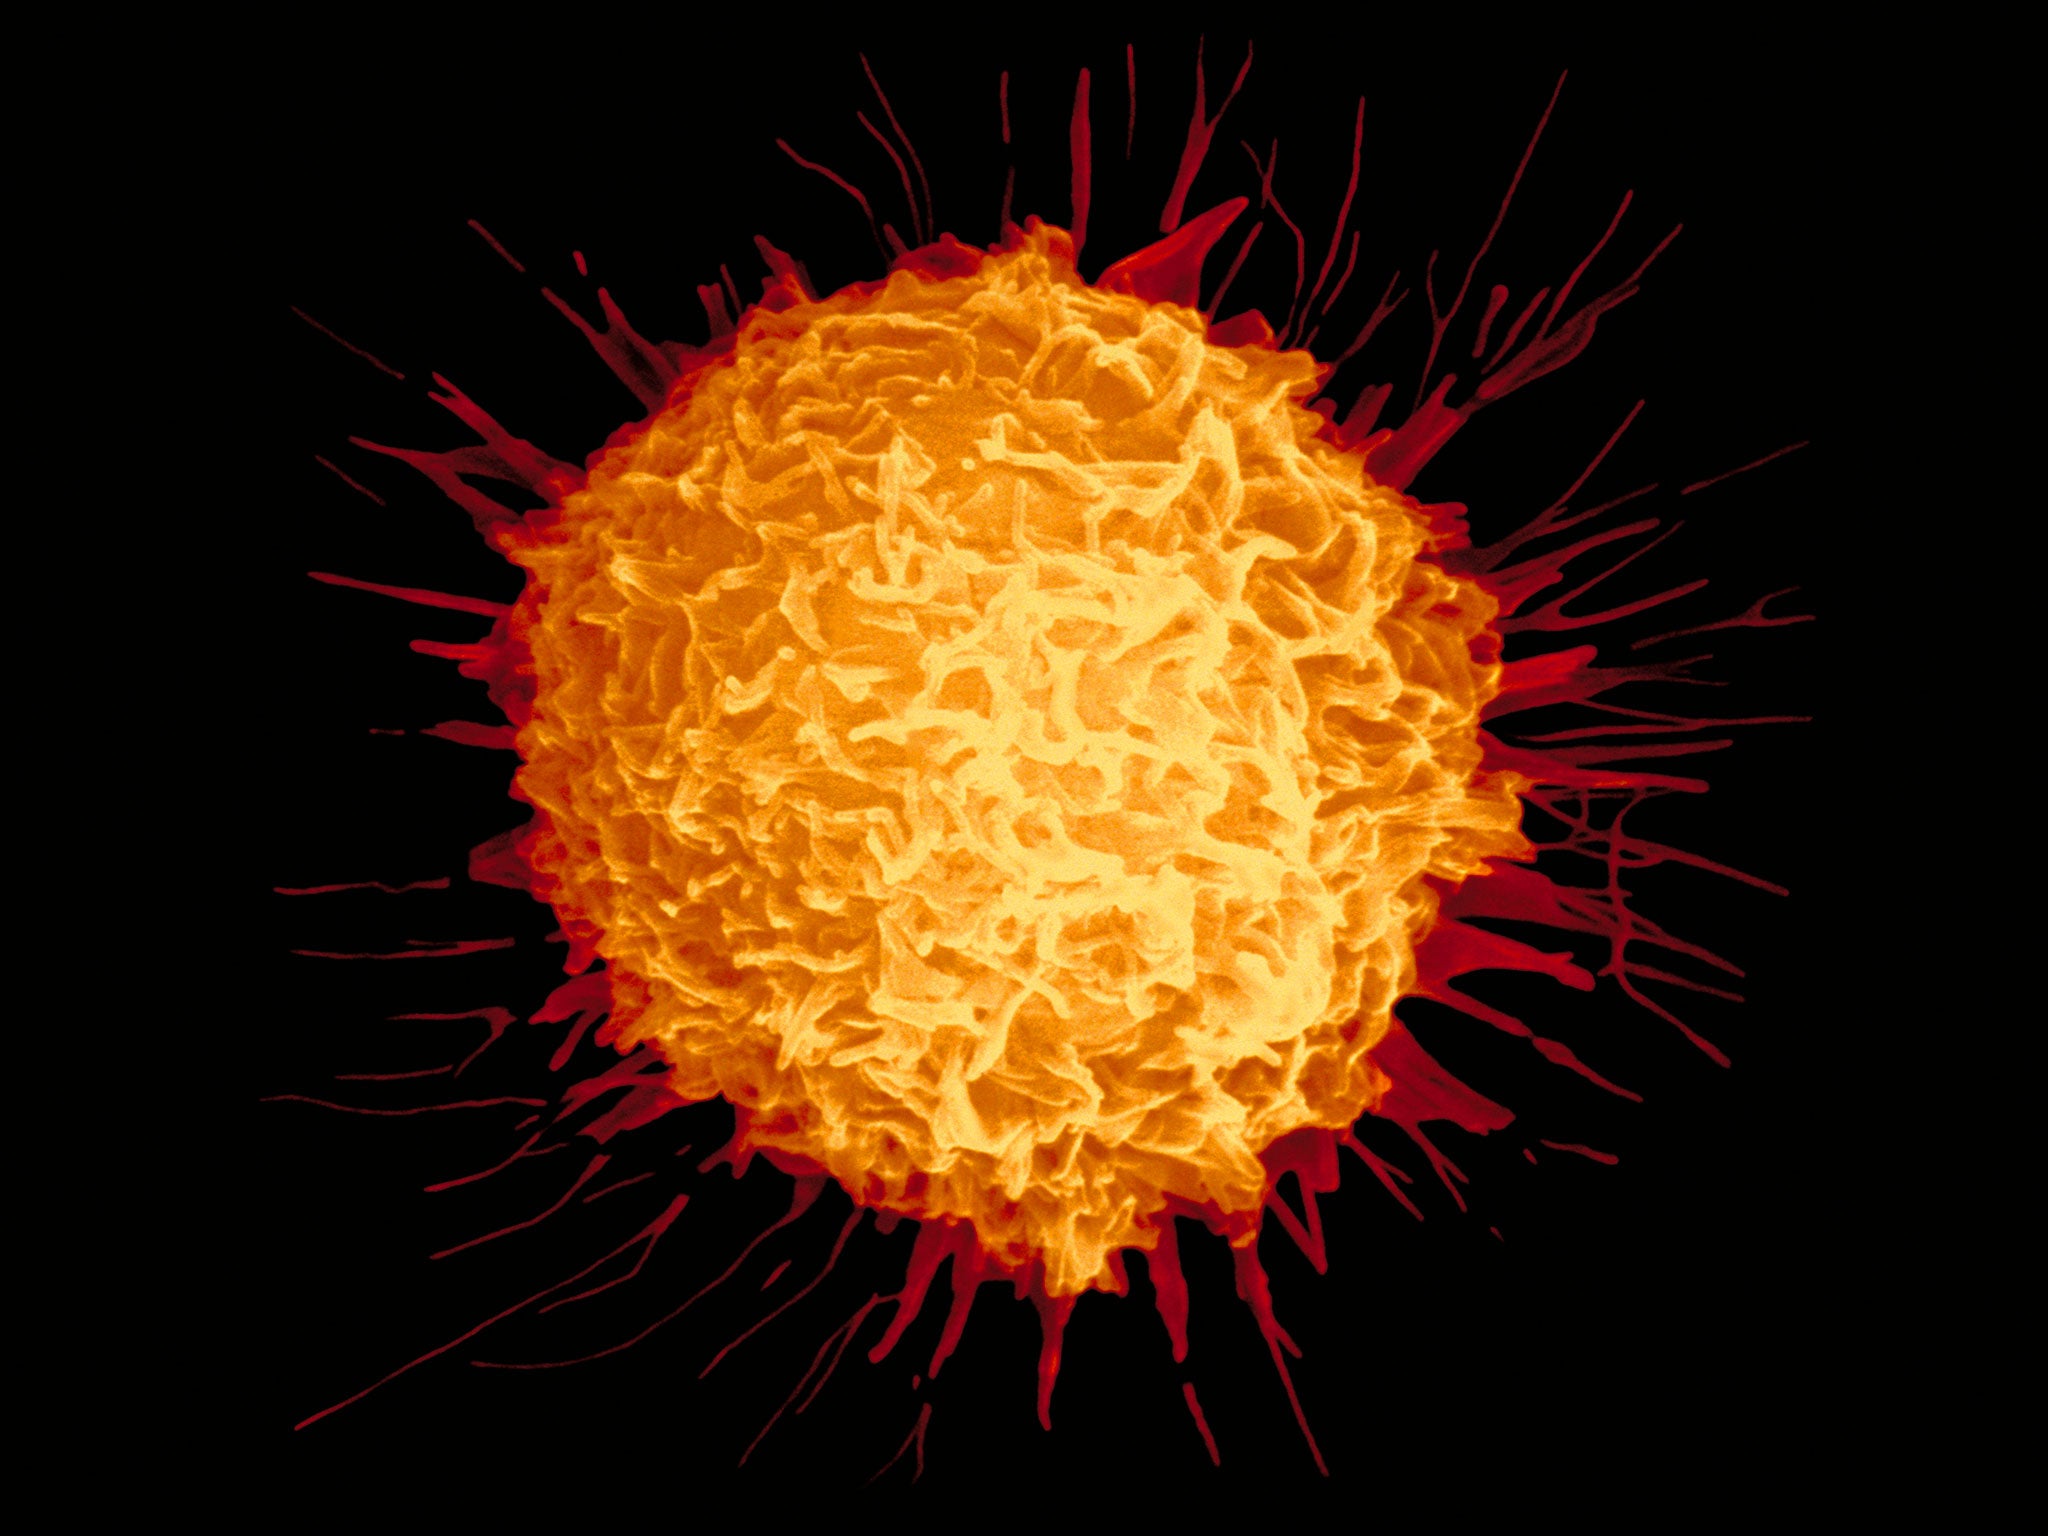 Coloured scanning electron micrograph (SEM) of a cancerous prostate cell